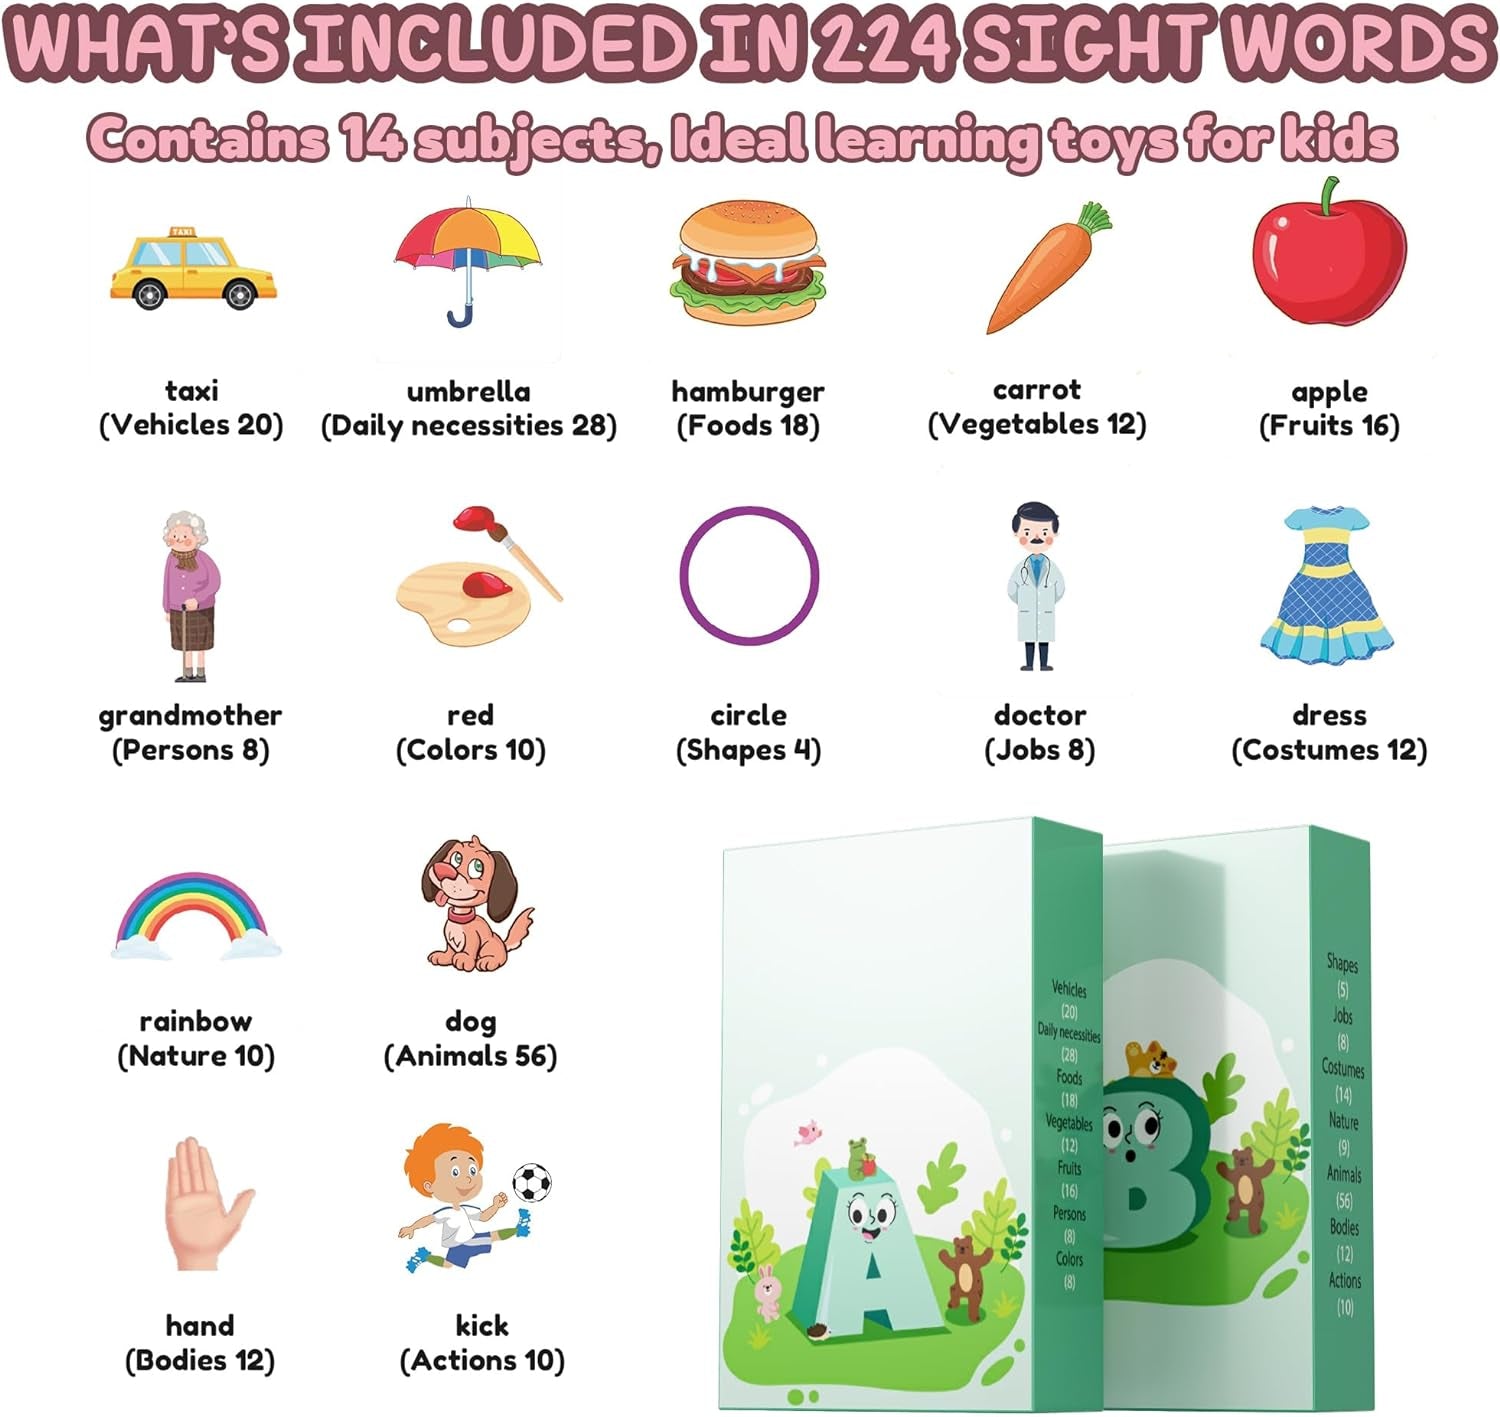 Toddler Toys Talking Flash Cards, Learning Toys for 1 2 3 4 5 Year Old Girls Boys, Kids Gifts Dinosaur Educational Montessori Pocket Speech Therapy 224 Sight Words Autism Sensory Toys